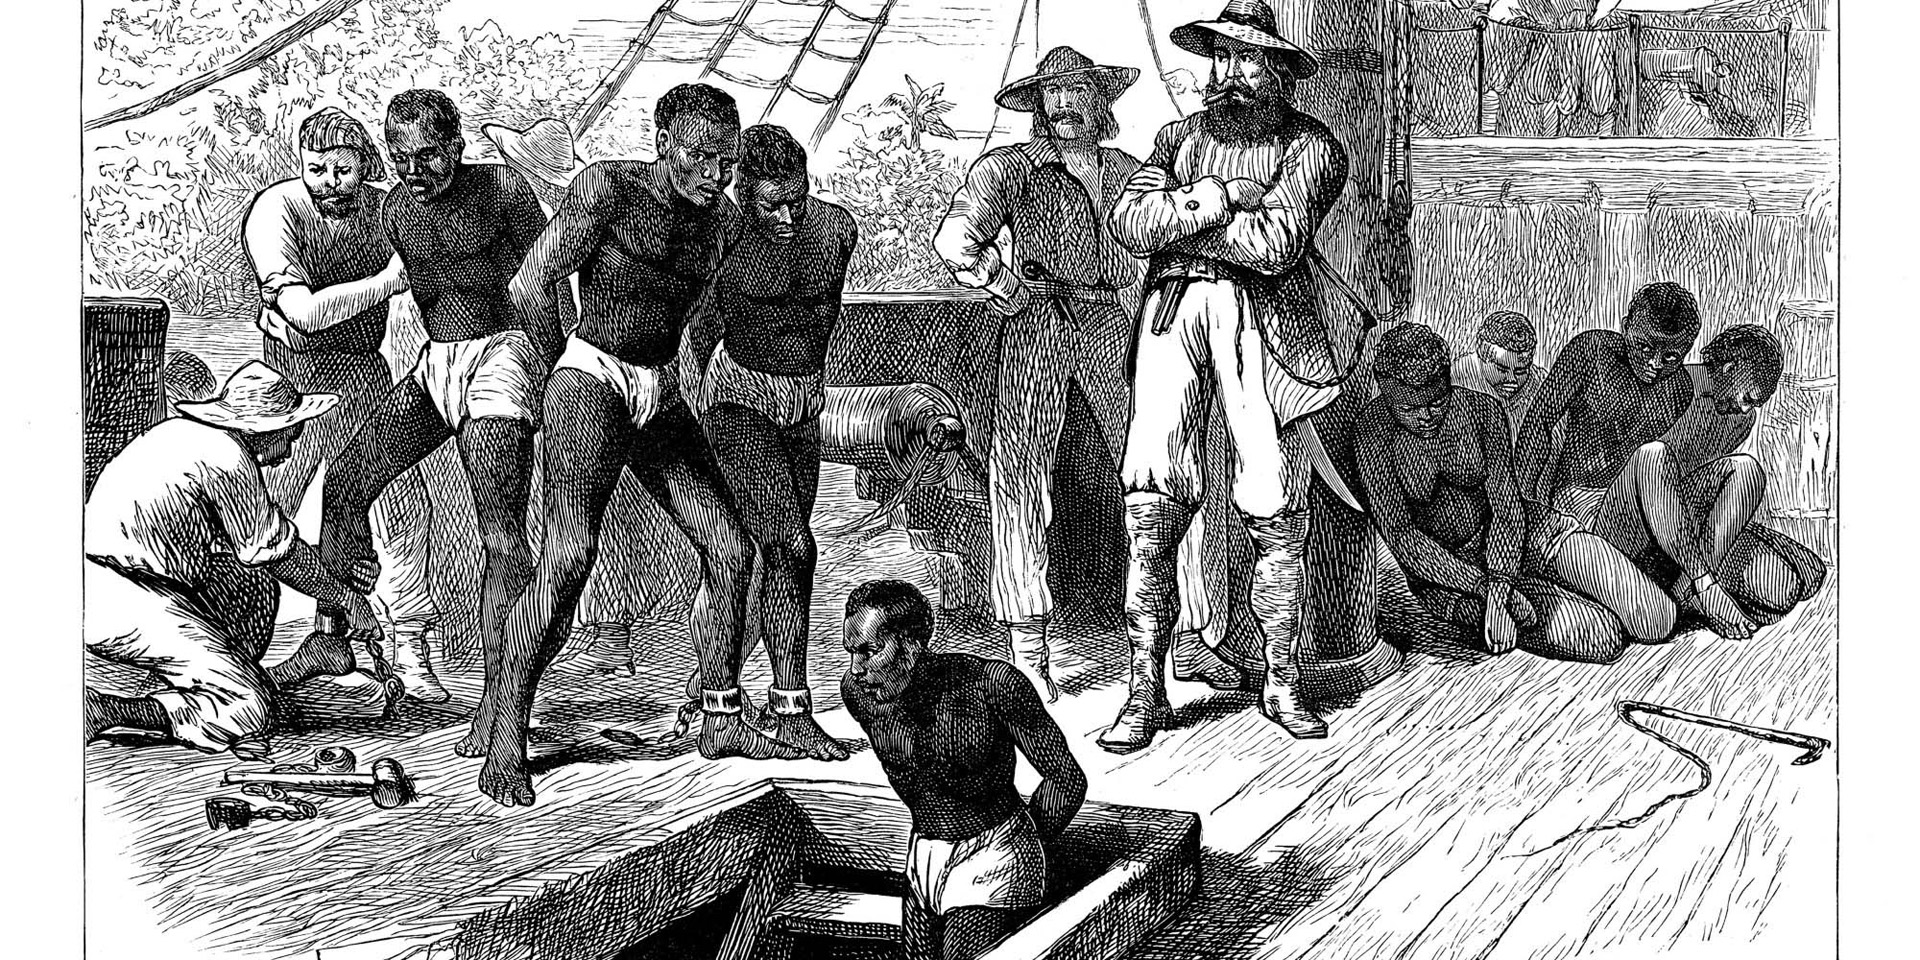 African slaves were transported in shocking conditions. Captives freed from slave ships were returned by the Americans to Liberia, the fledgling nation established by the American Colonization Society for American blacks.